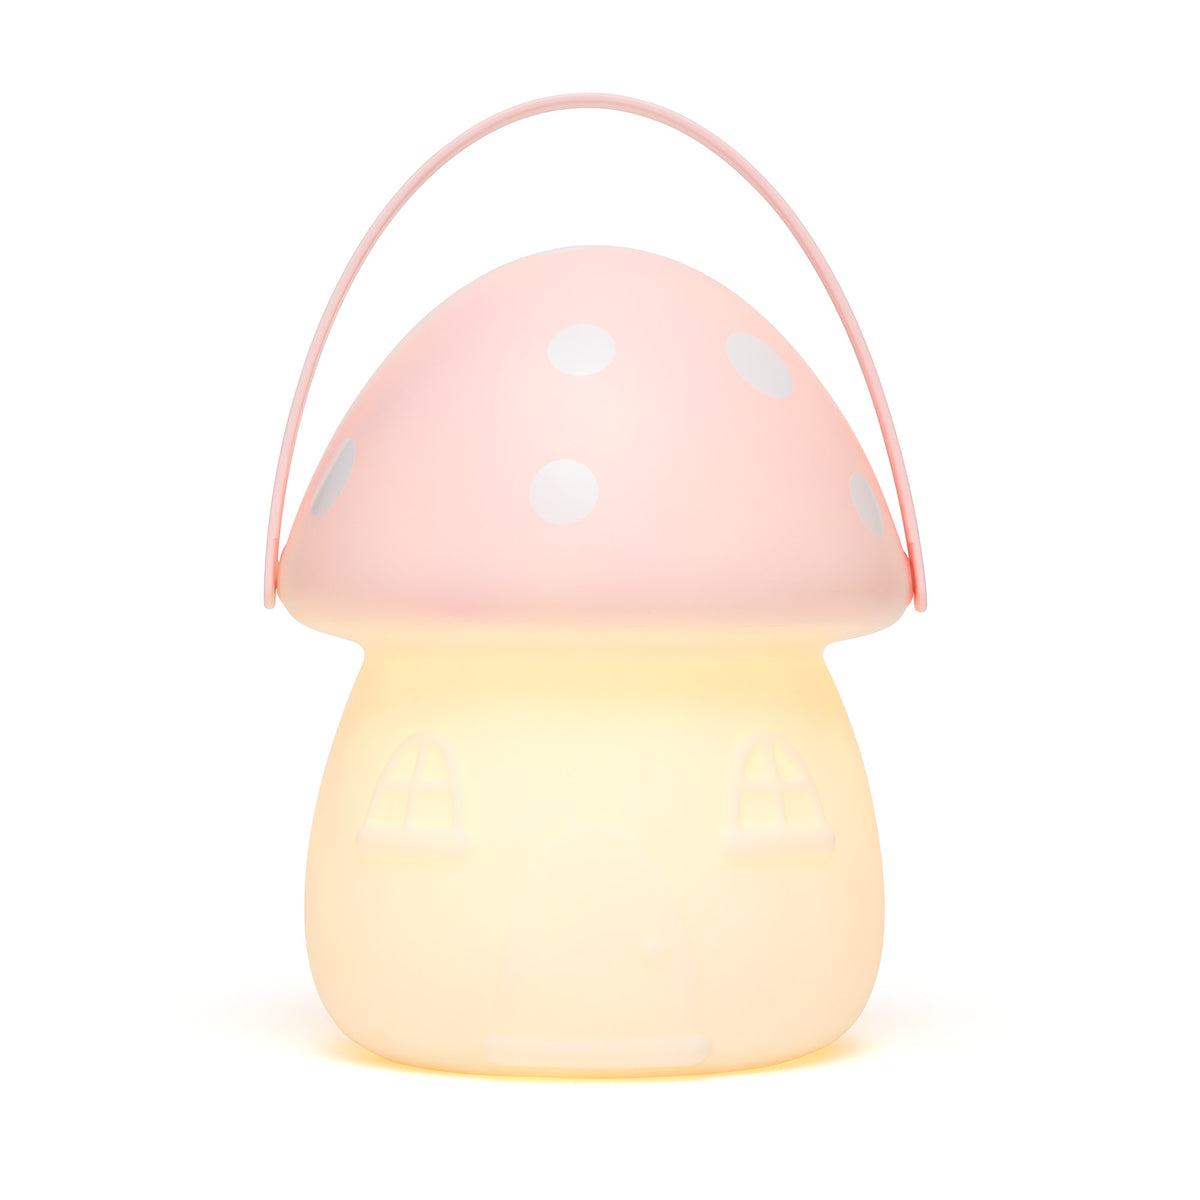 Fairy House Carry Lantern - Pink &amp; White PRE-ORDER NOW